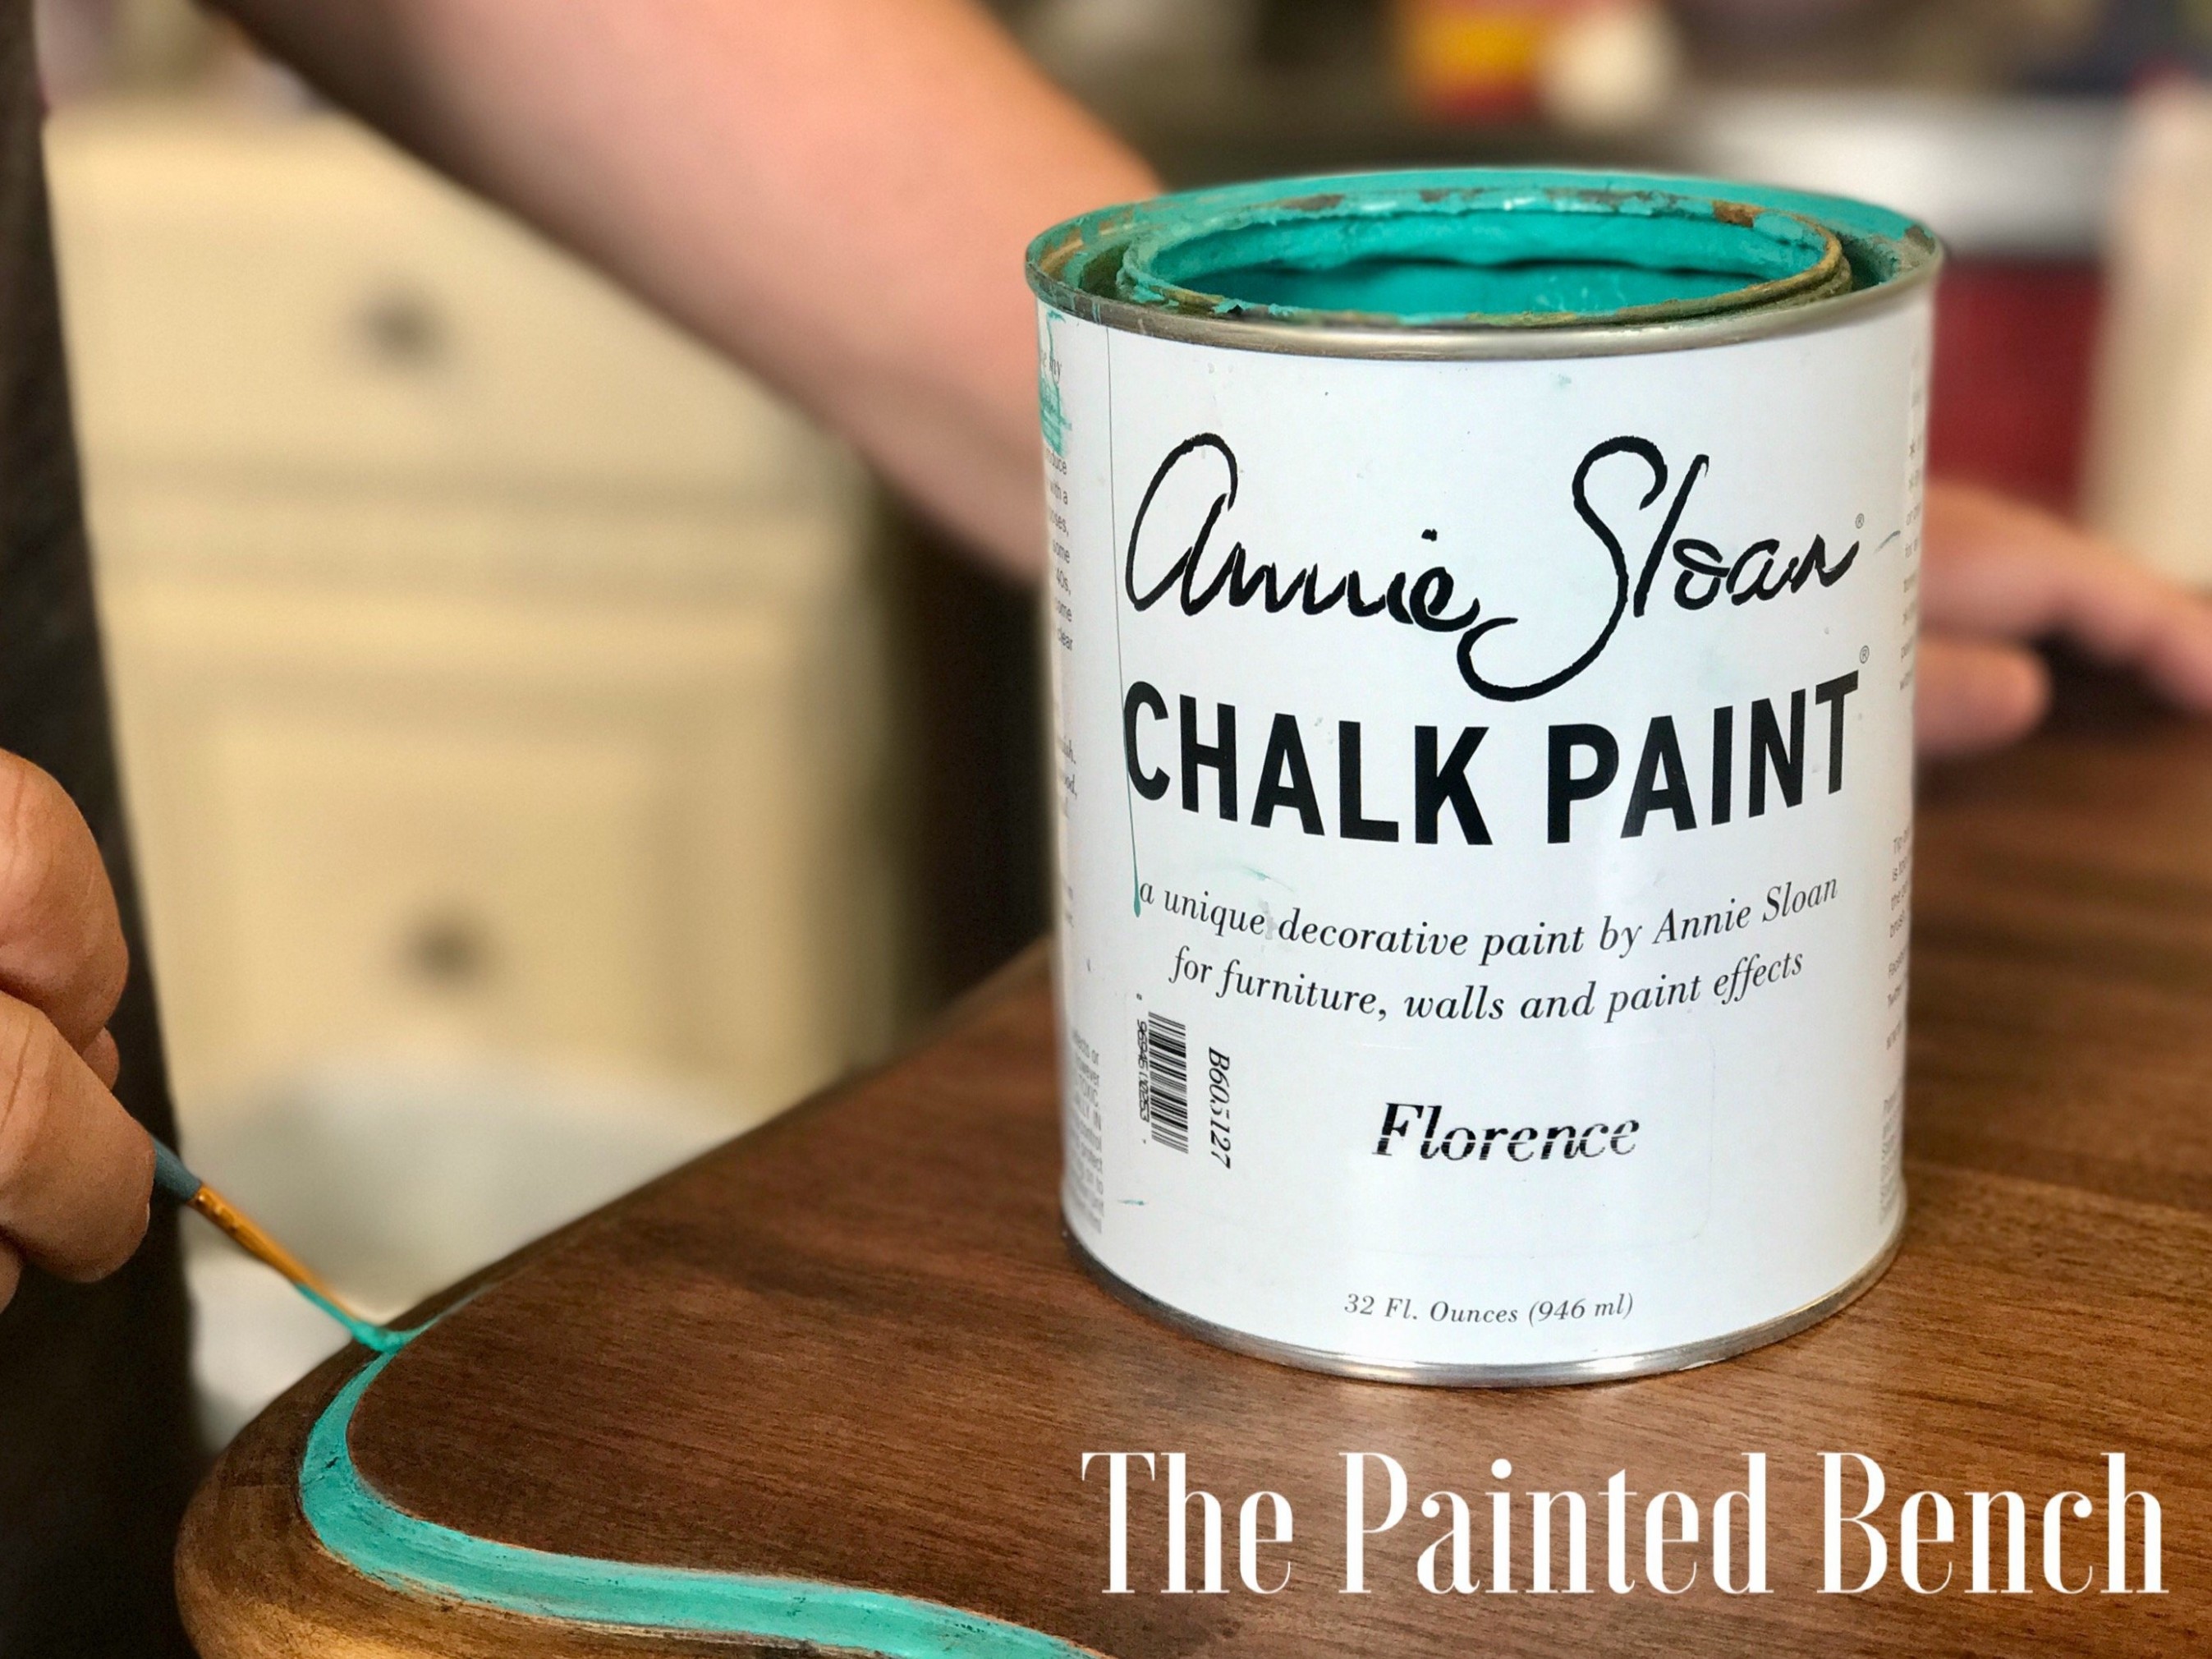 How To Repurpose A Dresser With Annie Sloan Paint The Painted Bench Annie Sloan Chalk Paint Stockists New Zealand